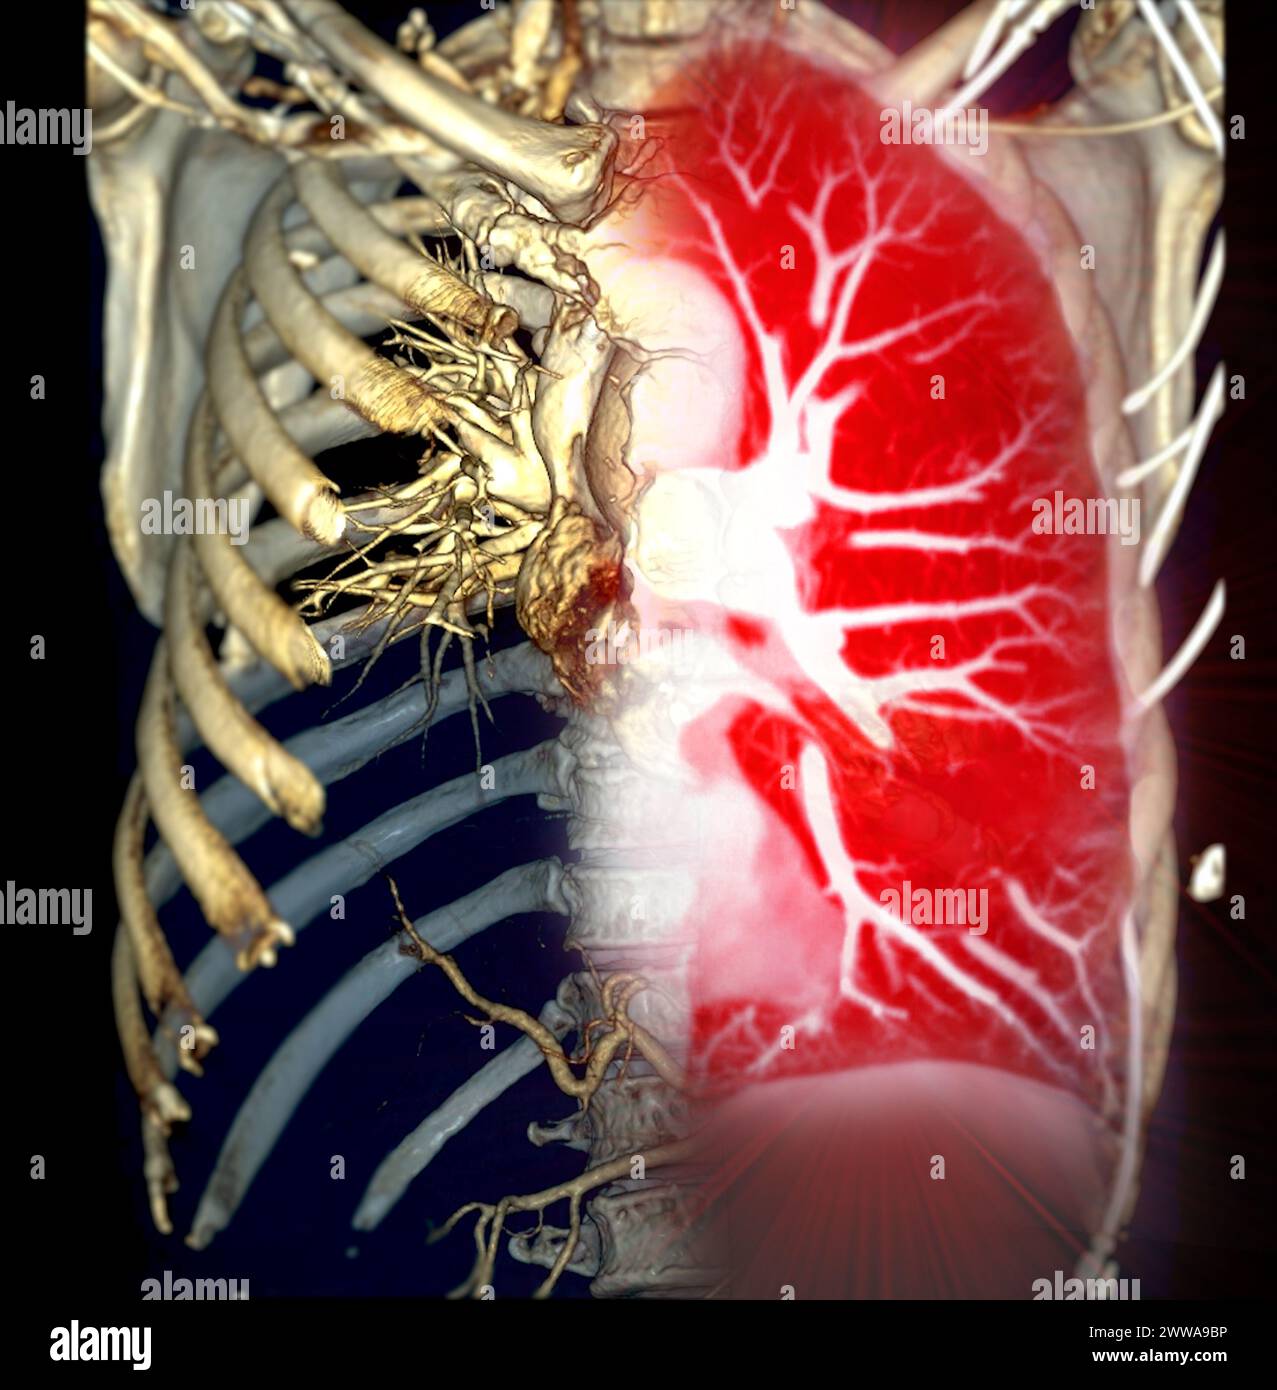 CTA thoracic aorta 3D rendering offers detailed visualization, providing clear insights into aortic anatomy, pathology, and surrounding structures for Stock Photo